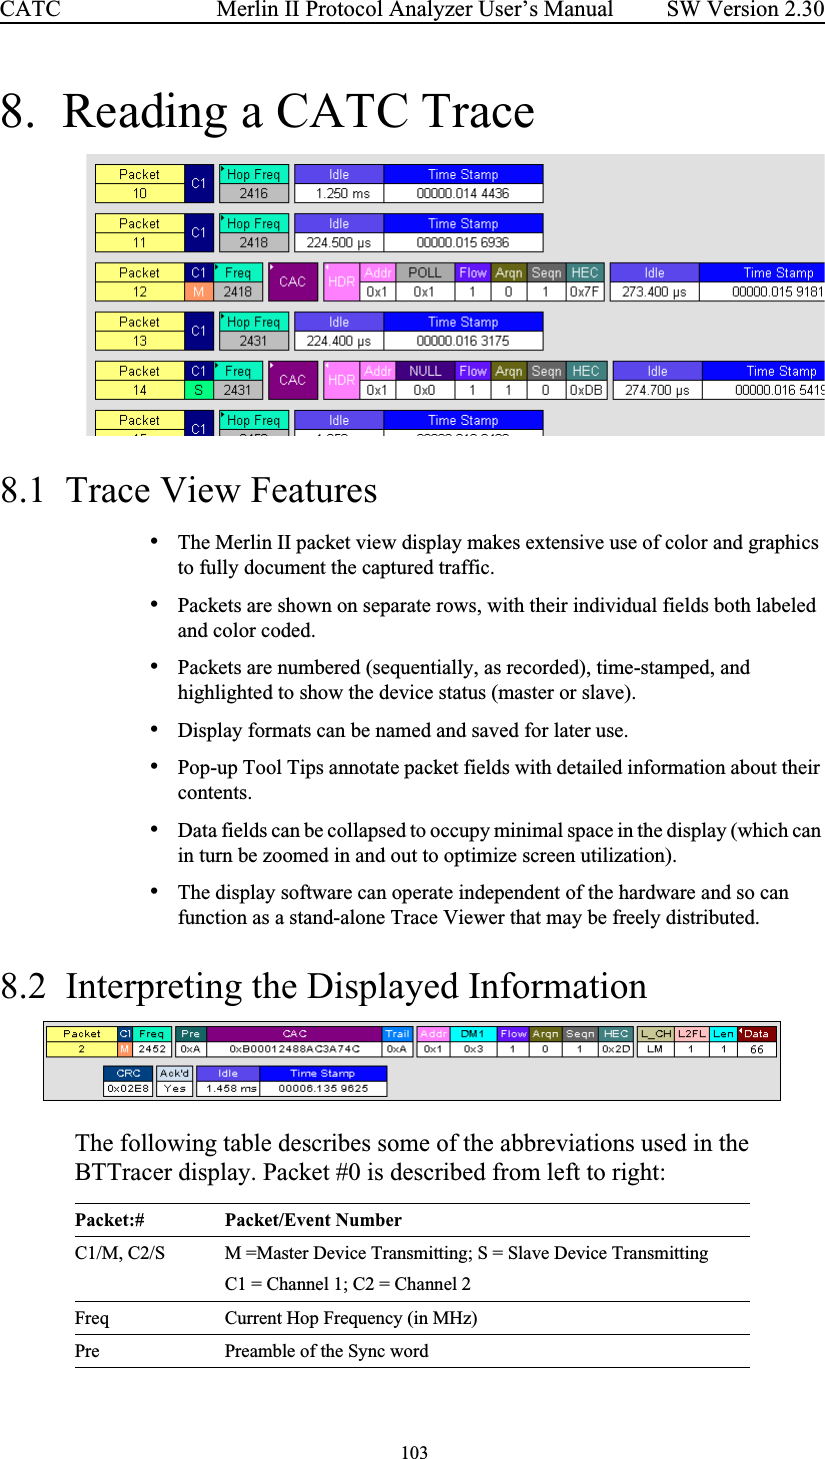  103 Merlin II Protocol Analyzer User’s ManualCATC SW Version 2.308.  Reading a CATC Trace8.1  Trace View Features•The Merlin II packet view display makes extensive use of color and graphics to fully document the captured traffic.•Packets are shown on separate rows, with their individual fields both labeled and color coded. •Packets are numbered (sequentially, as recorded), time-stamped, and highlighted to show the device status (master or slave).•Display formats can be named and saved for later use. •Pop-up Tool Tips annotate packet fields with detailed information about their contents.•Data fields can be collapsed to occupy minimal space in the display (which can in turn be zoomed in and out to optimize screen utilization). •The display software can operate independent of the hardware and so can function as a stand-alone Trace Viewer that may be freely distributed.8.2  Interpreting the Displayed InformationThe following table describes some of the abbreviations used in the BTTracer display. Packet #0 is described from left to right:Packet:# Packet/Event NumberC1/M, C2/S M =Master Device Transmitting; S = Slave Device TransmittingC1 = Channel 1; C2 = Channel 2Freq Current Hop Frequency (in MHz)Pre Preamble of the Sync word